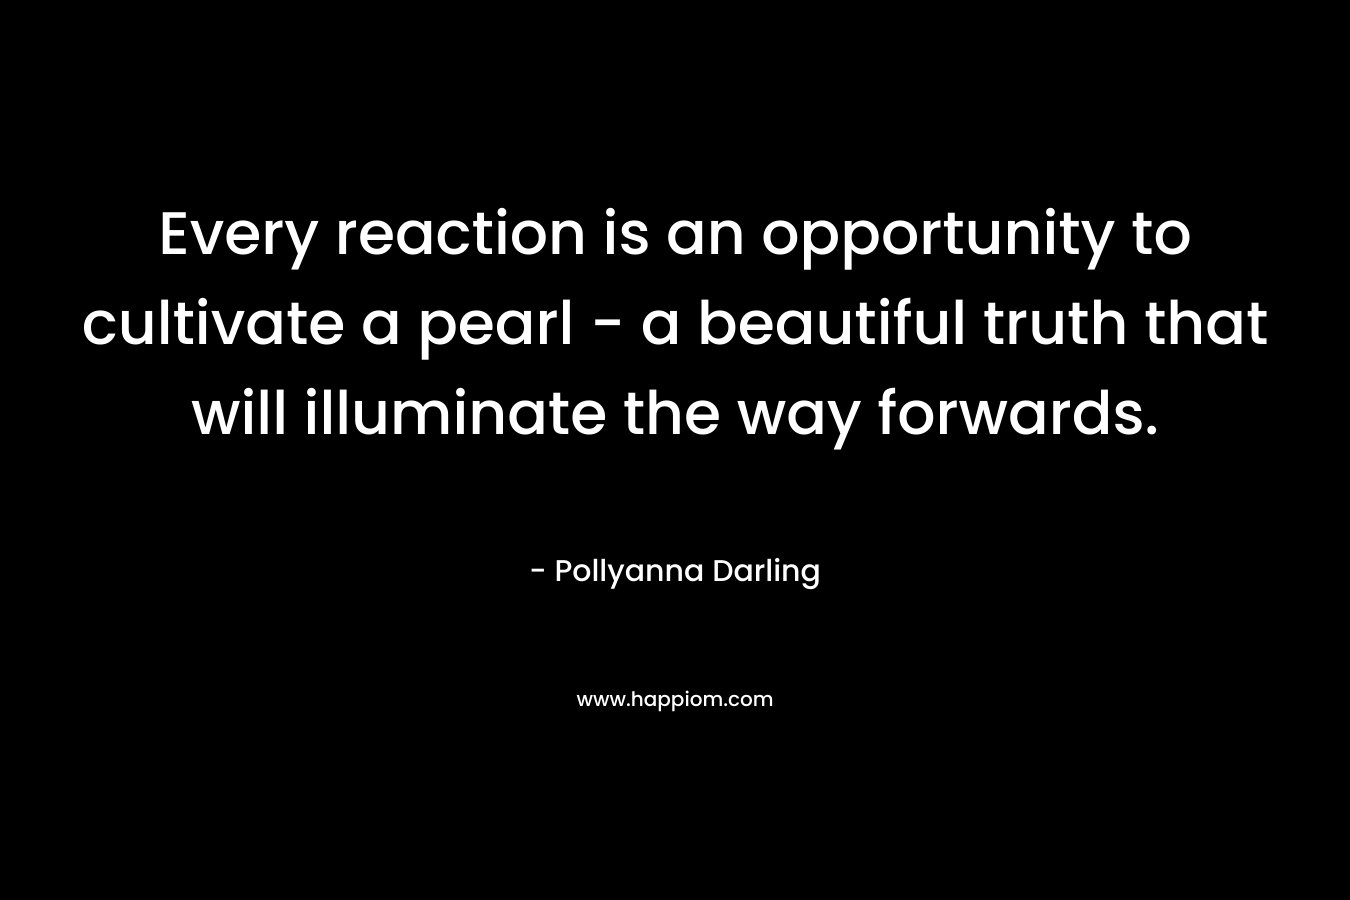 Every reaction is an opportunity to cultivate a pearl – a beautiful truth that will illuminate the way forwards. – Pollyanna Darling